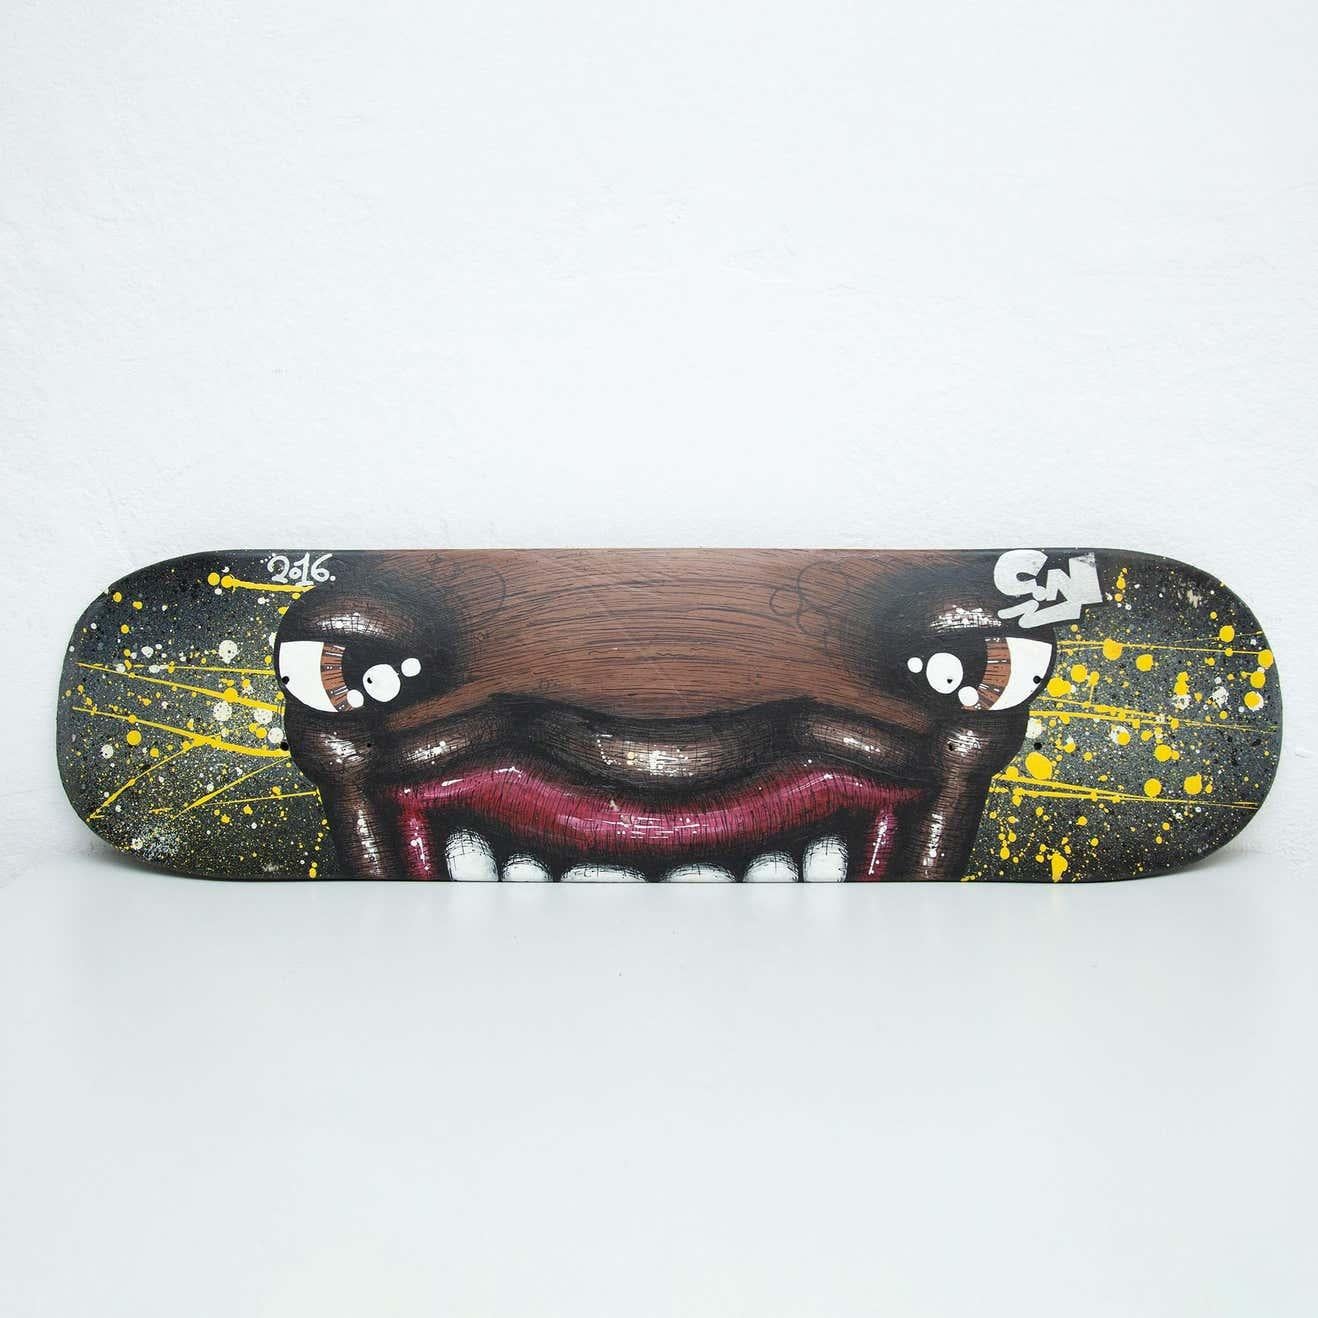 Vintage hand painted skateboard, circa 1989.
In original condition, with minor wear consistent with age and use, preserving a beautiful patina.

Materials:
Wood
Metal

Dimensions:
D cm x W cm x H cm.